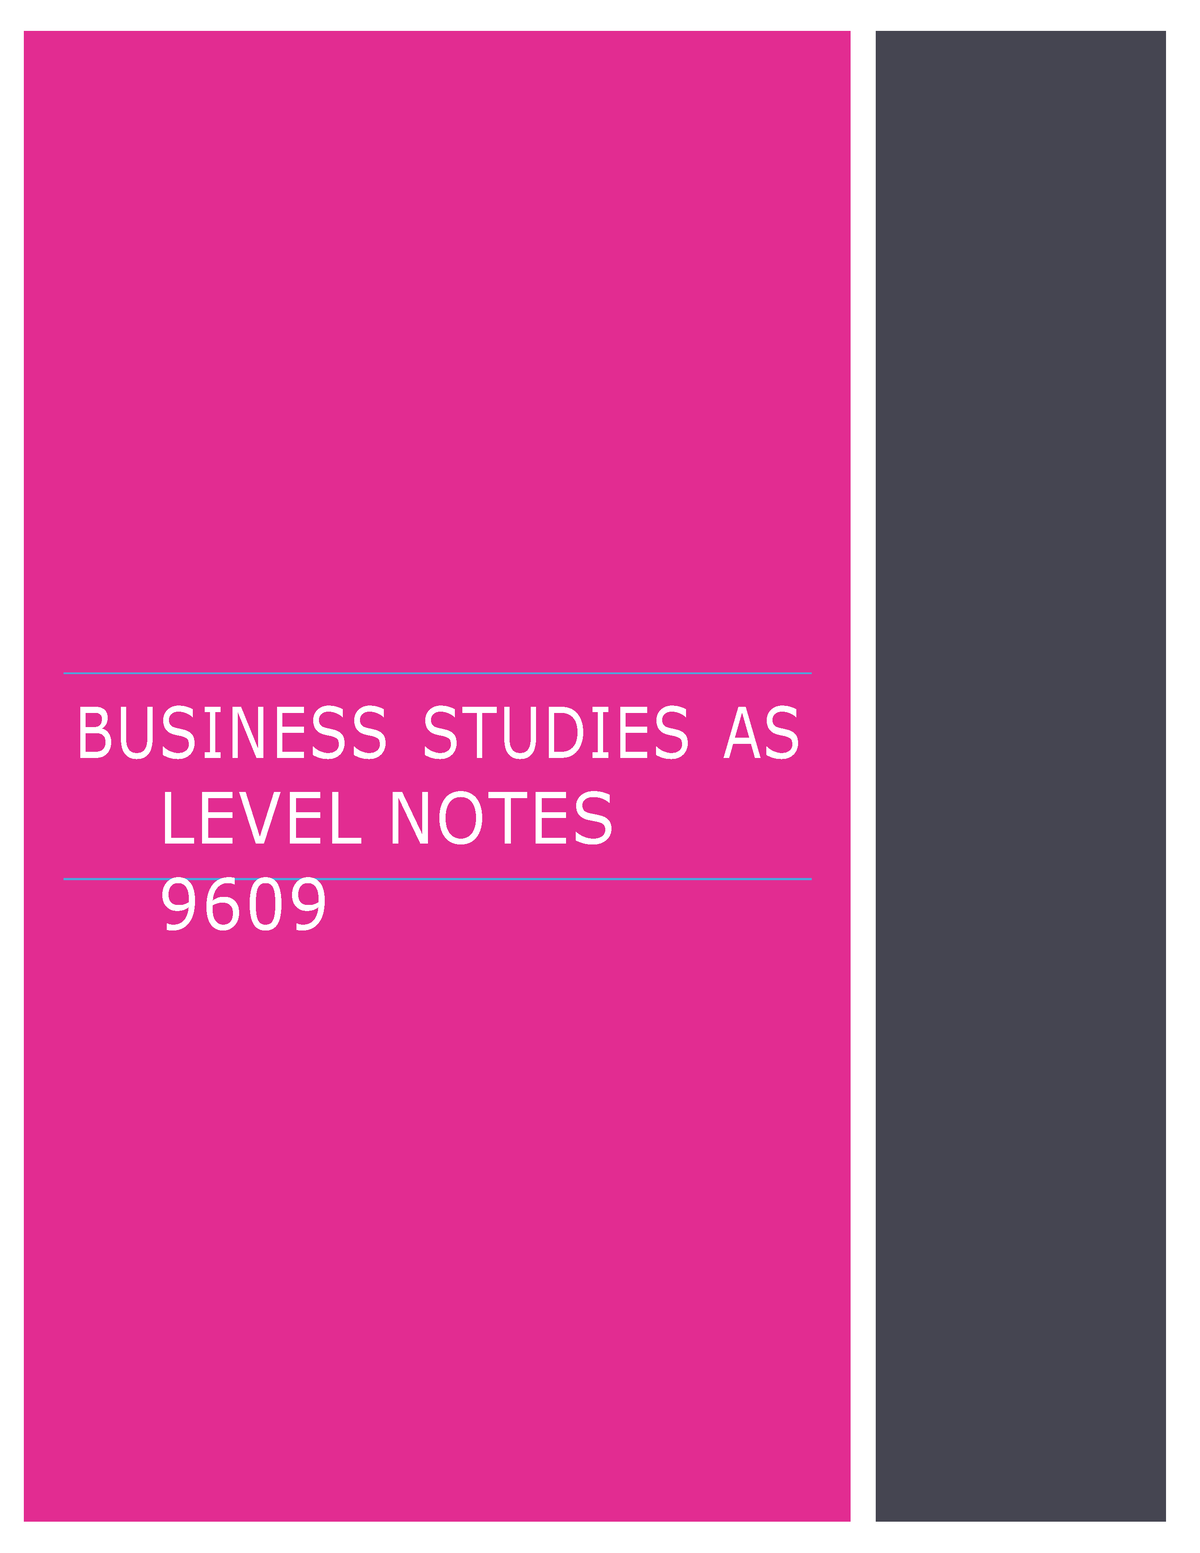 as-business-summary-note-business-studies-as-level-notes-9609